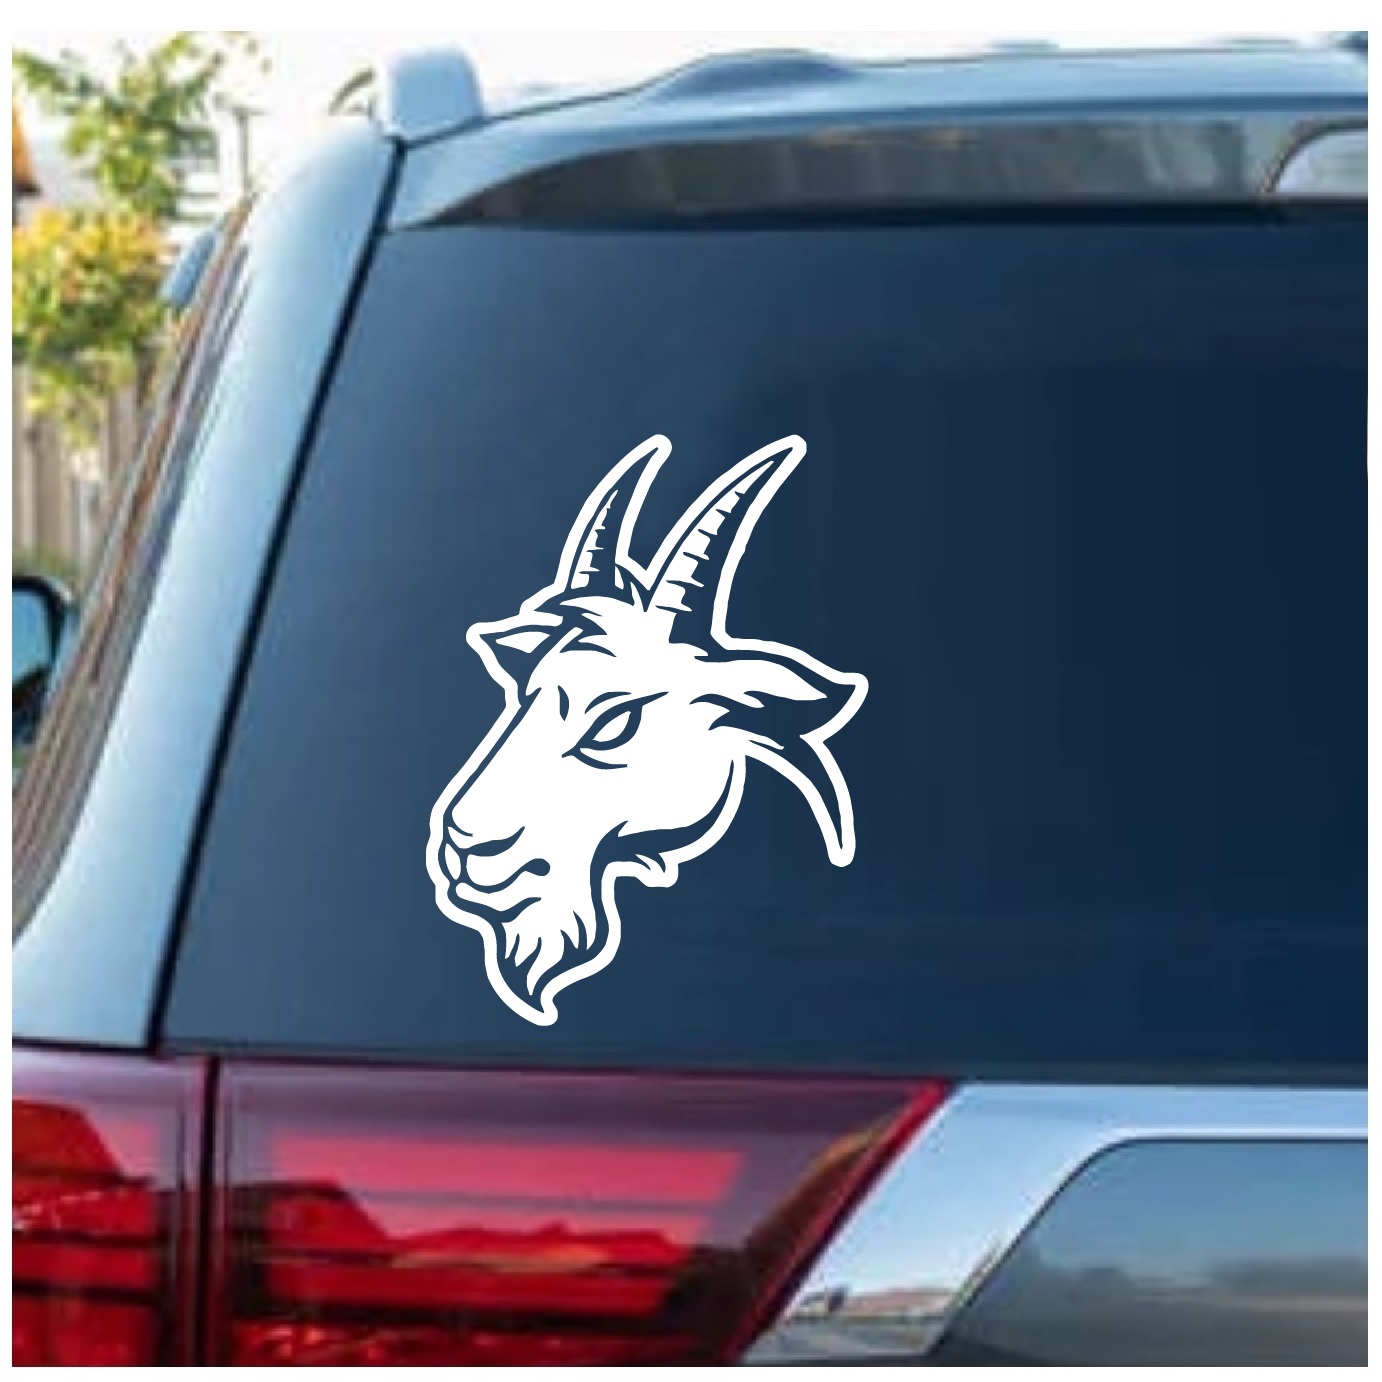 Angry Old Goat Vinyl Decal Old Goat Decal for Car, Truck, Window, Trailer,  Bumper, Home, Laptop, Walls or Wherever -  Canada